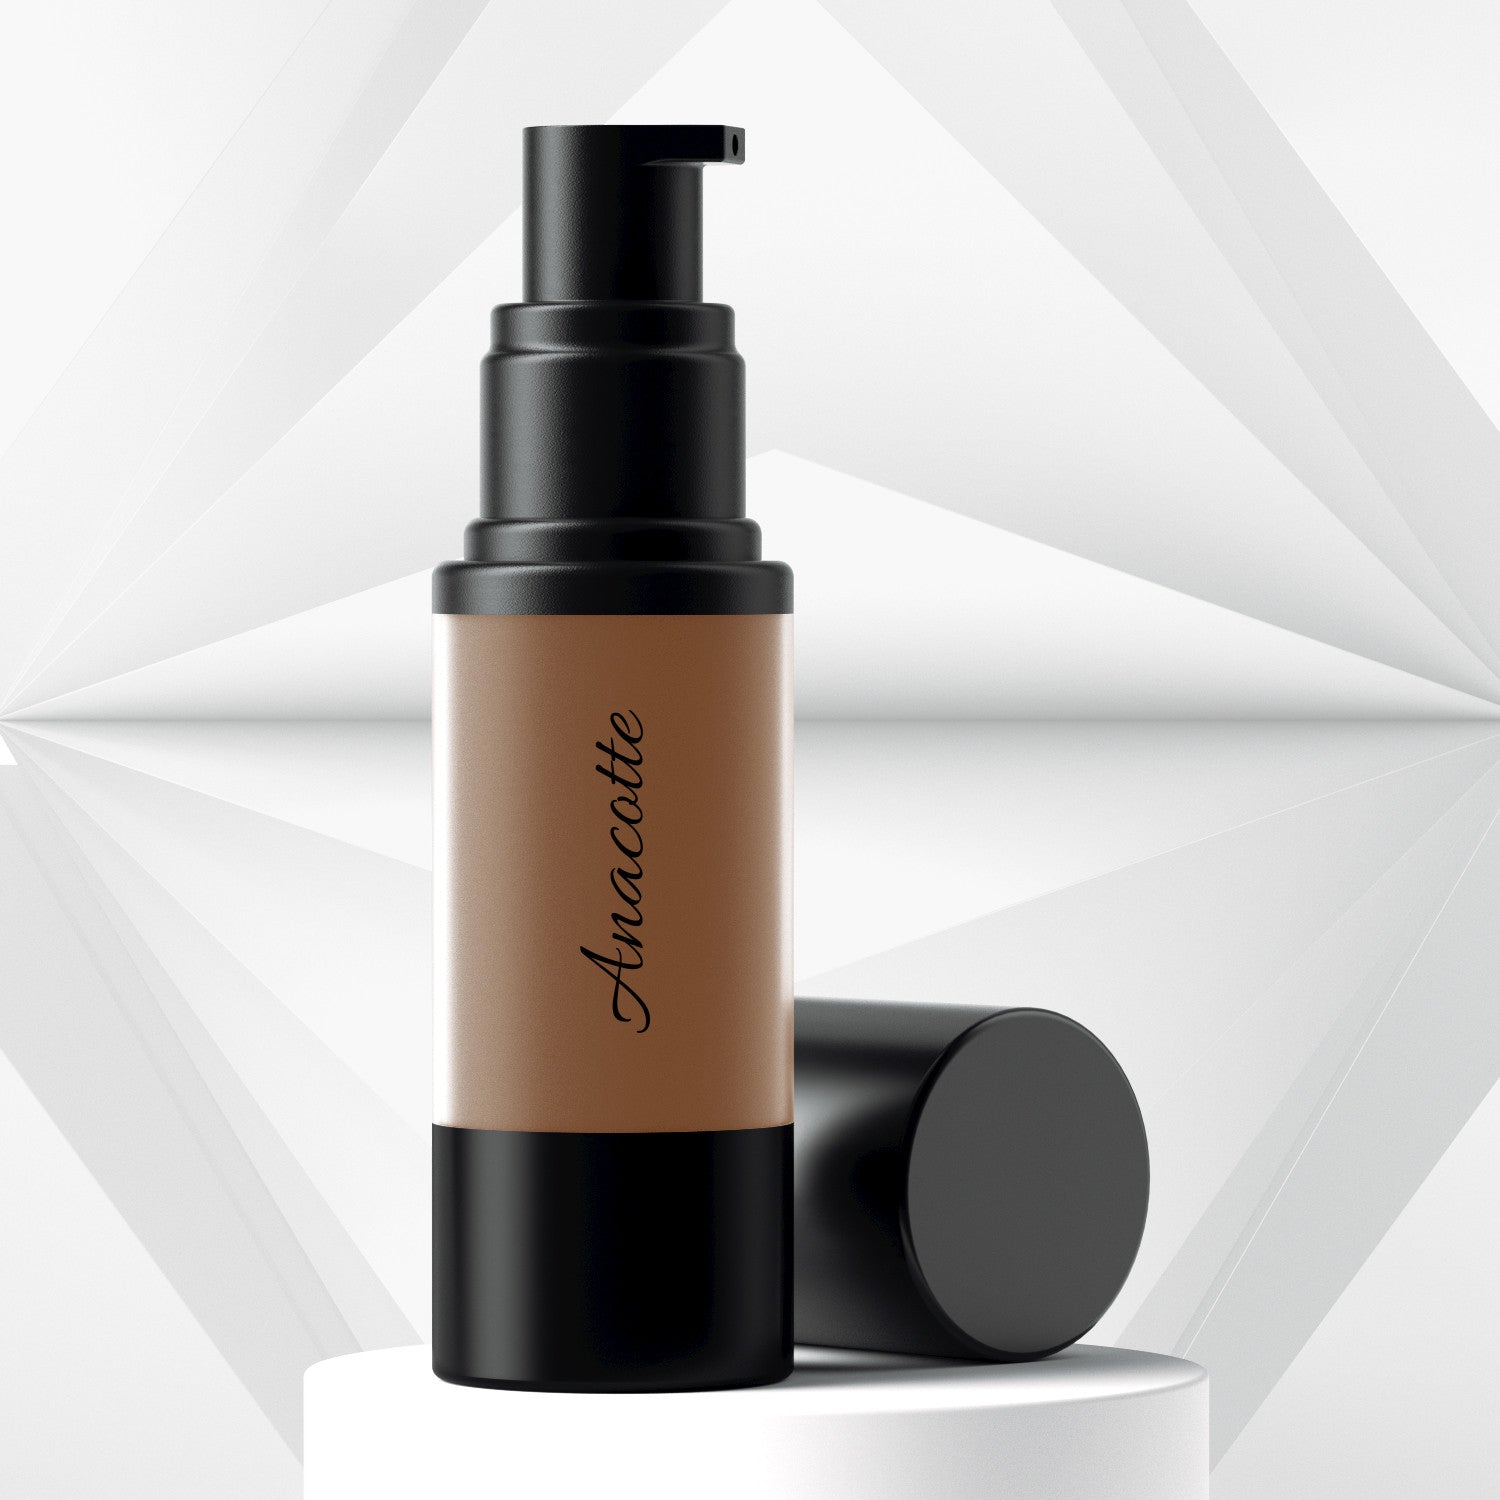 Anacotte Anti-aging Oil-Free Foundation Makeup grey